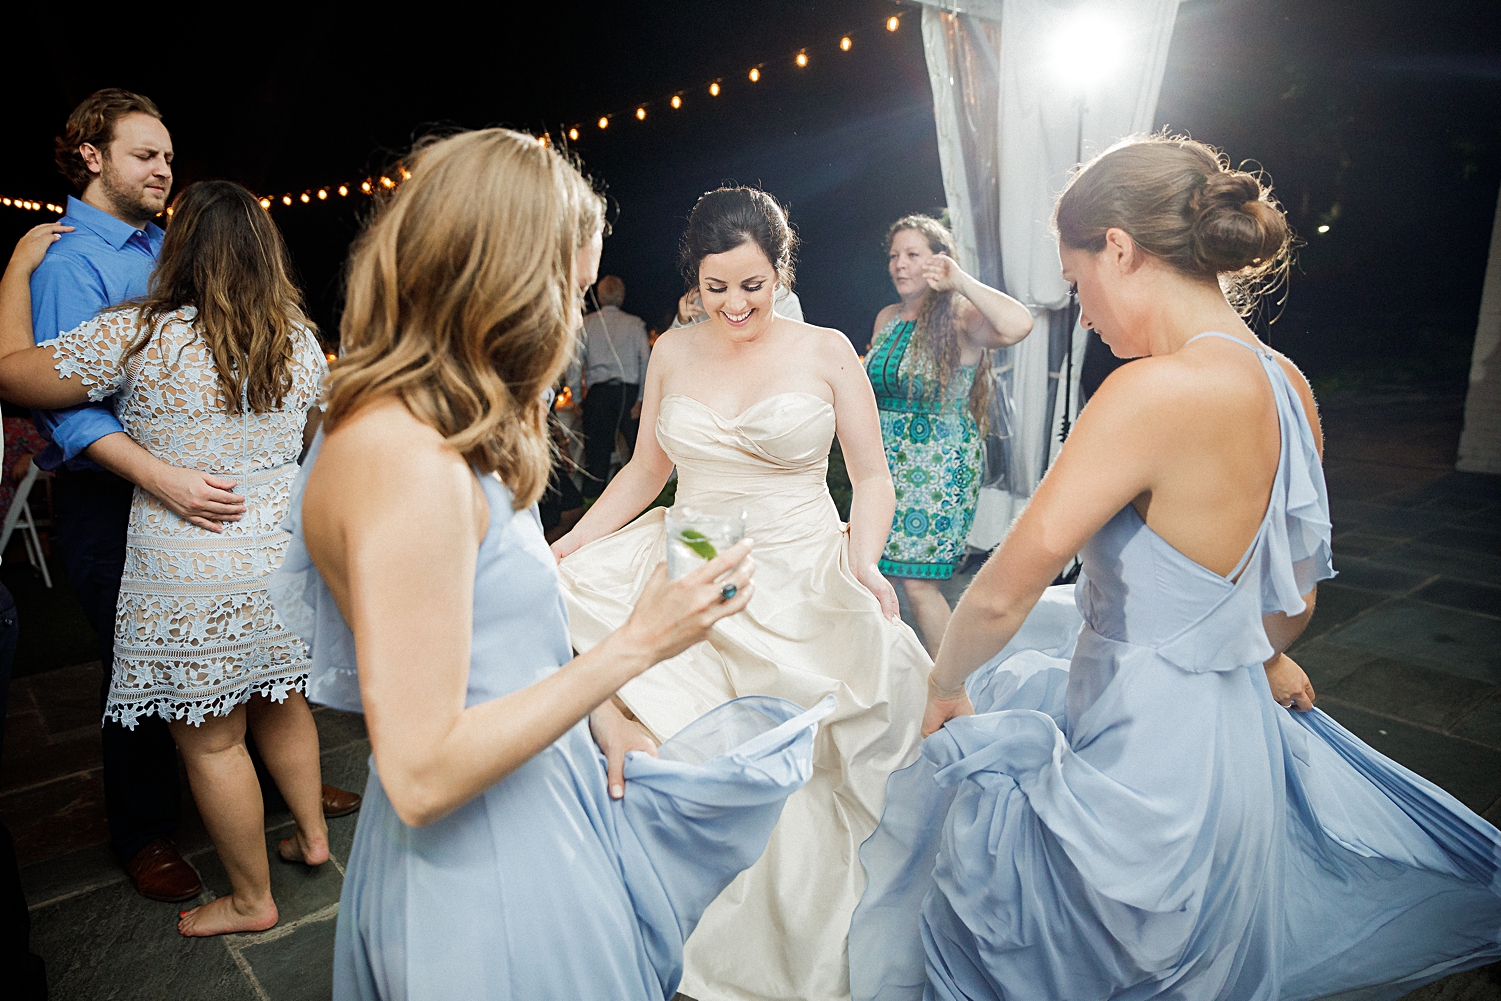 bride dancing with bridesmaids in blue dresses at wedding reception